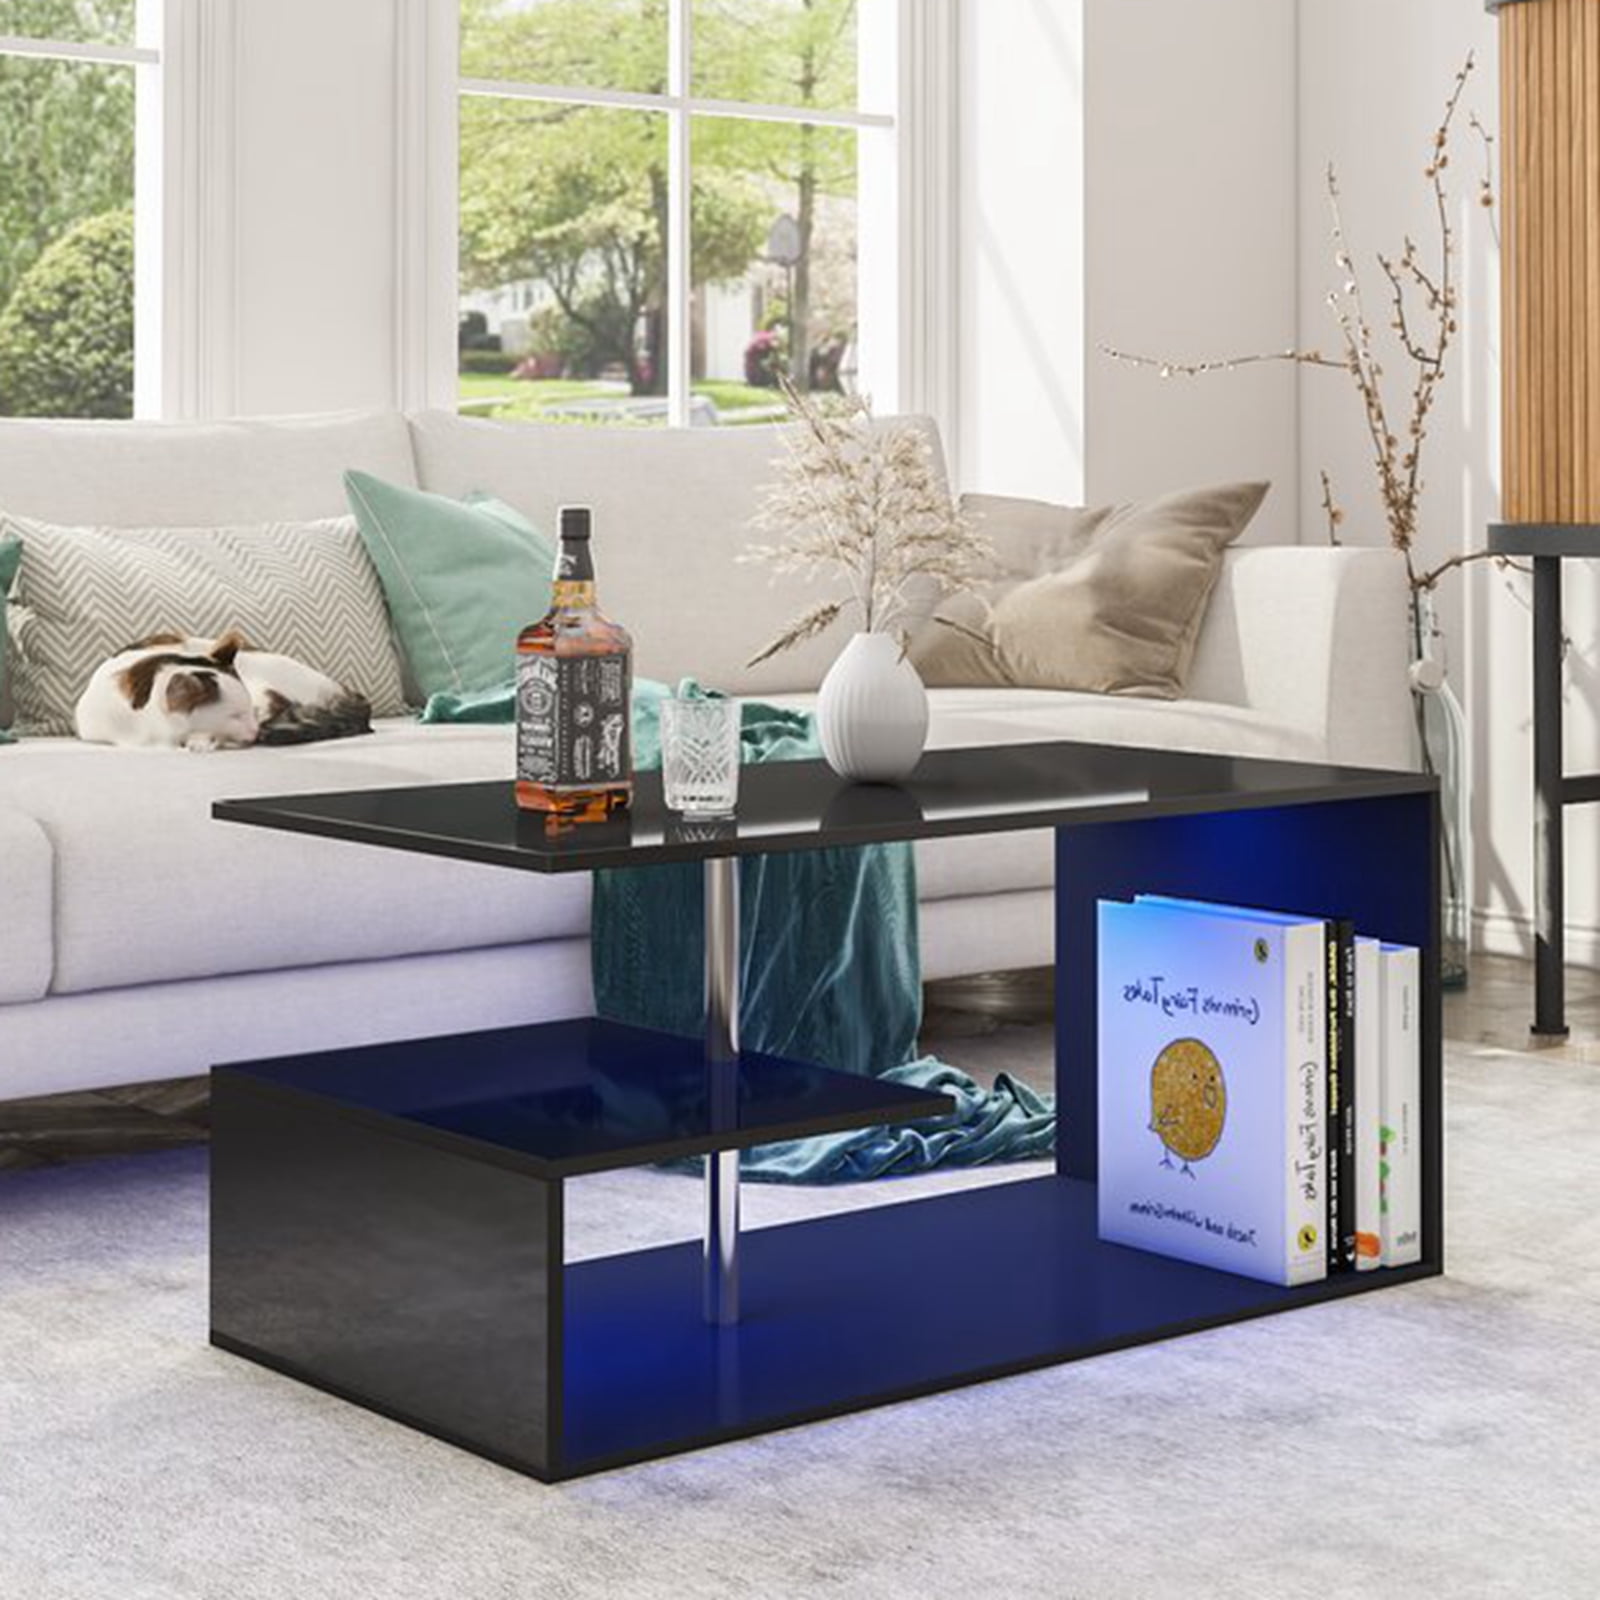 Hommpa High Gloss Coffee Table with Open Shelf LED Lights Smart